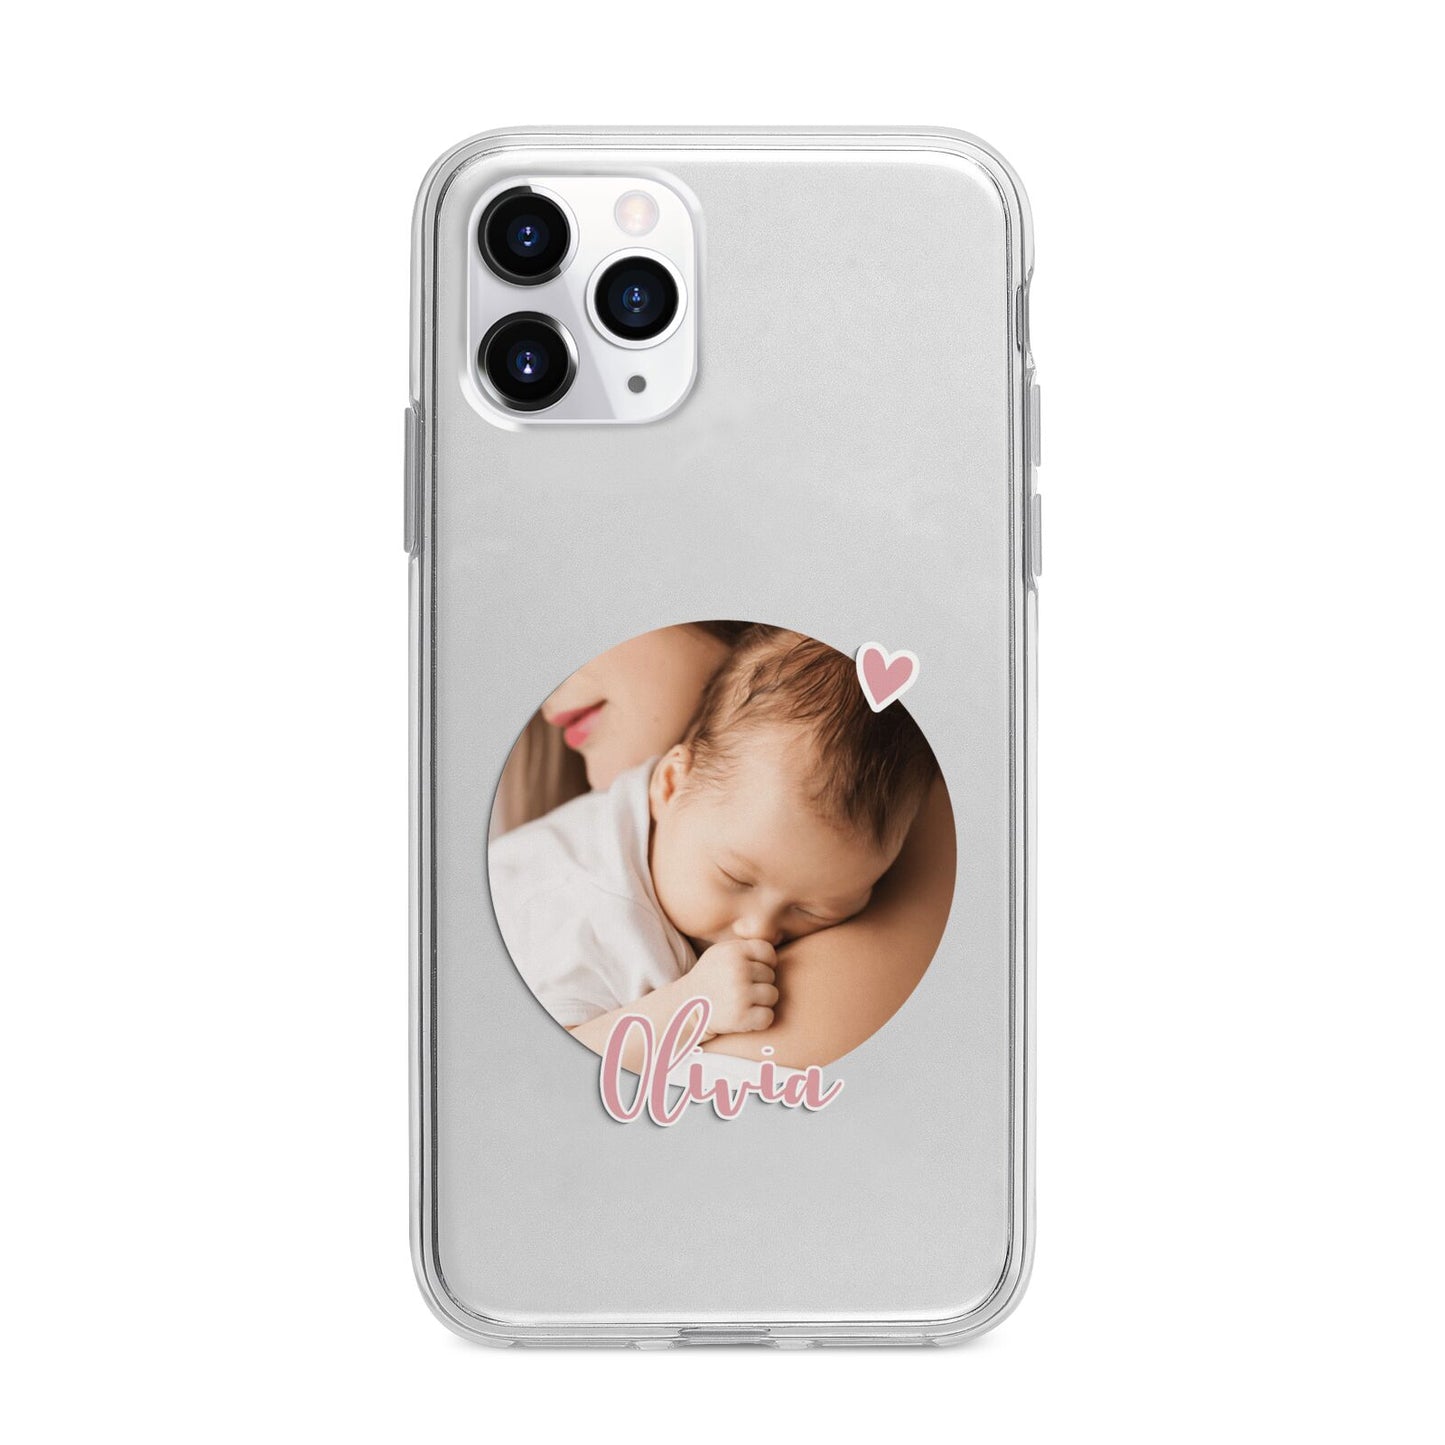 Round Photo Love Upload Apple iPhone 11 Pro Max in Silver with Bumper Case